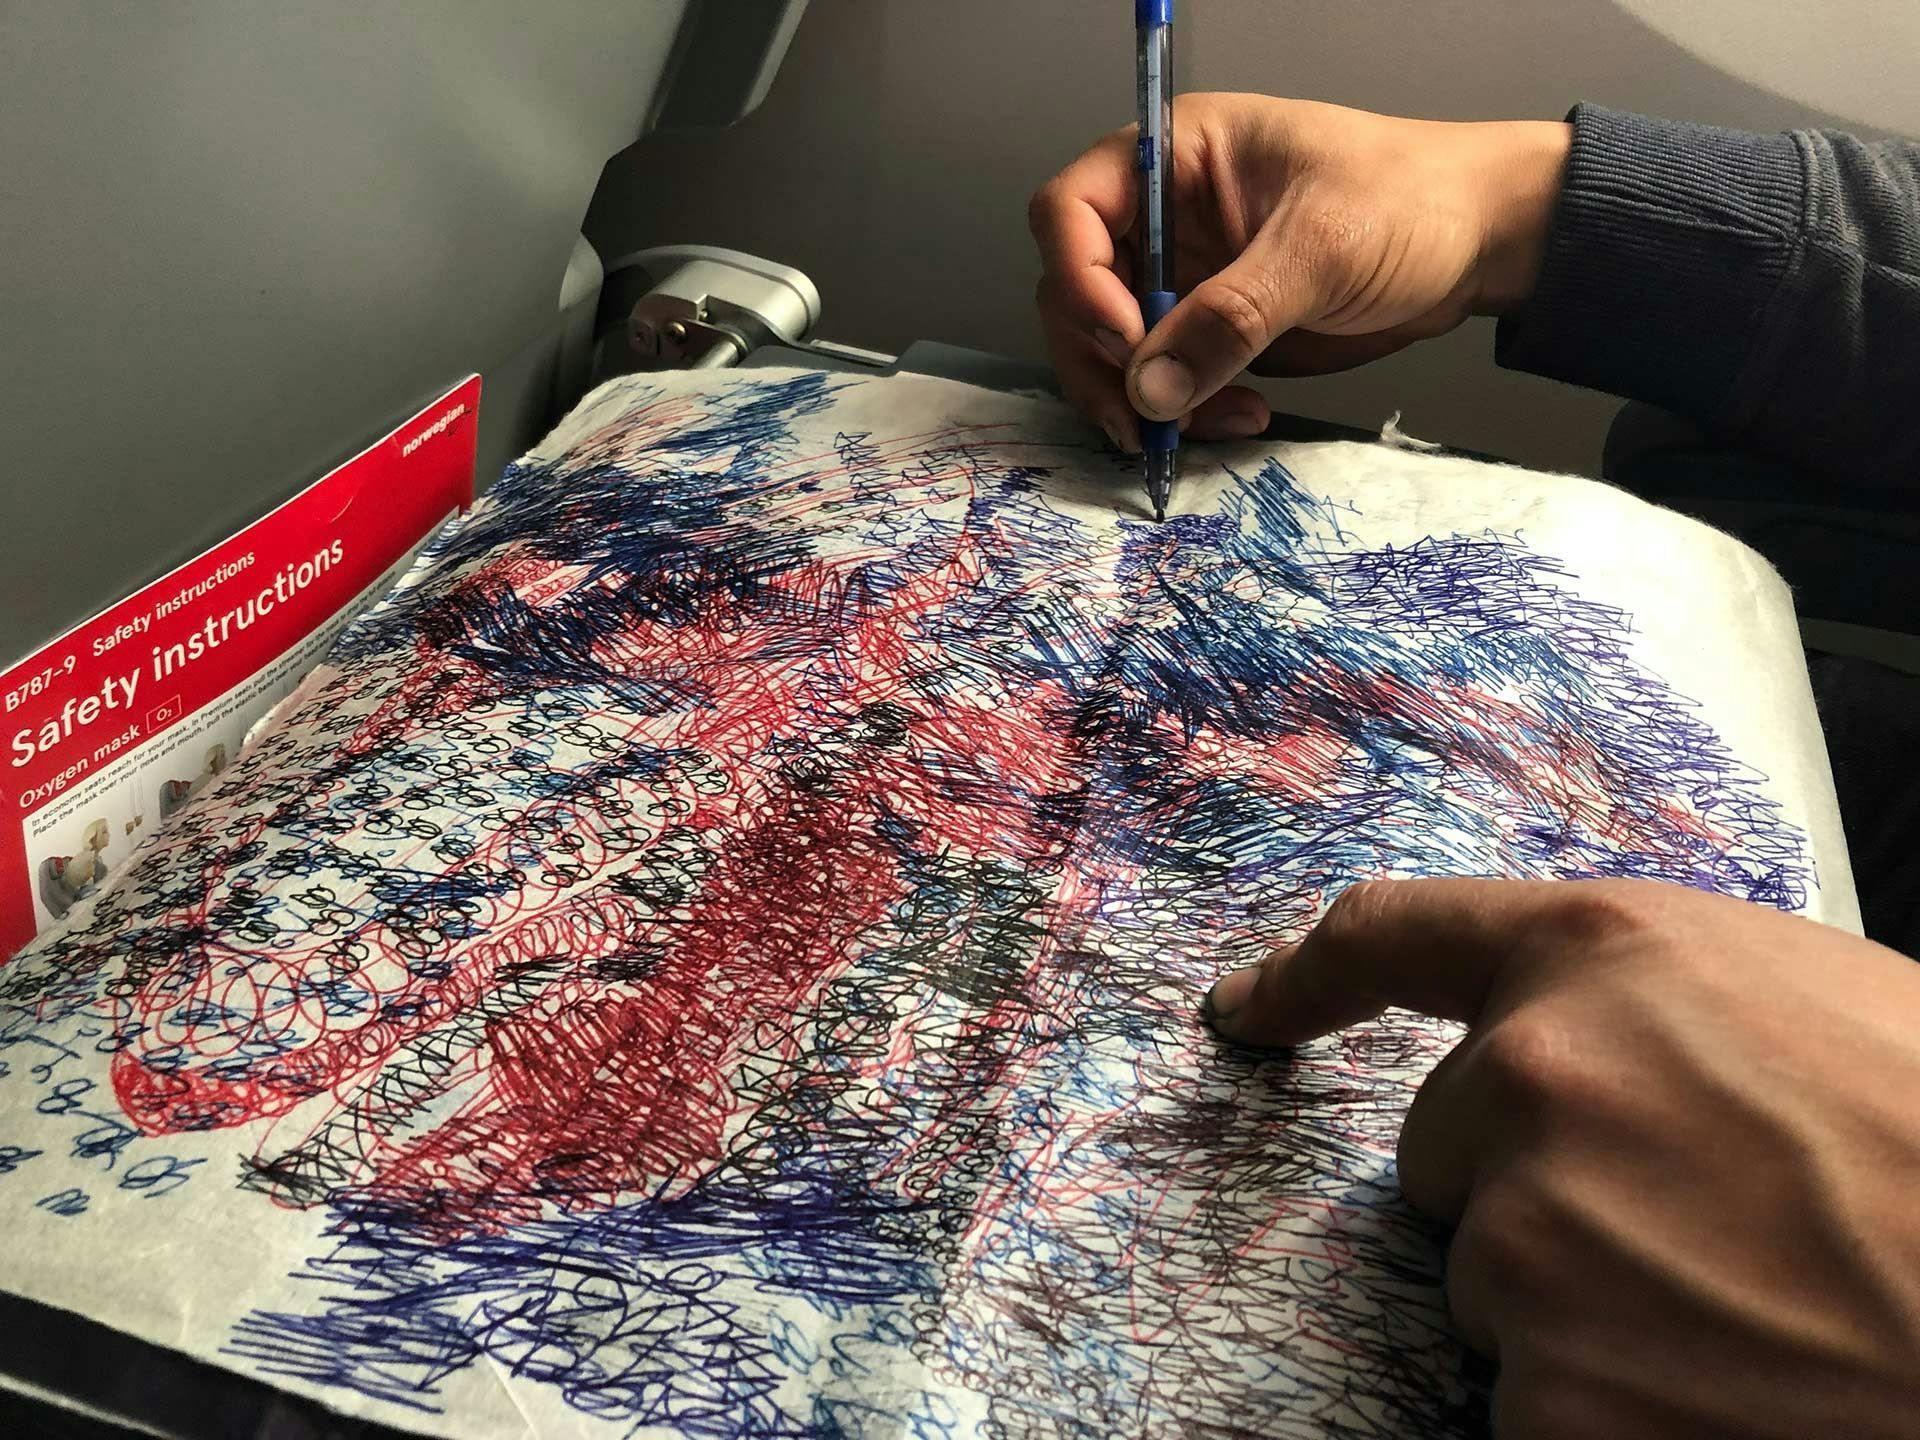 A photograph of Oscar Murillo drawing during a plane journey, dated 2019.